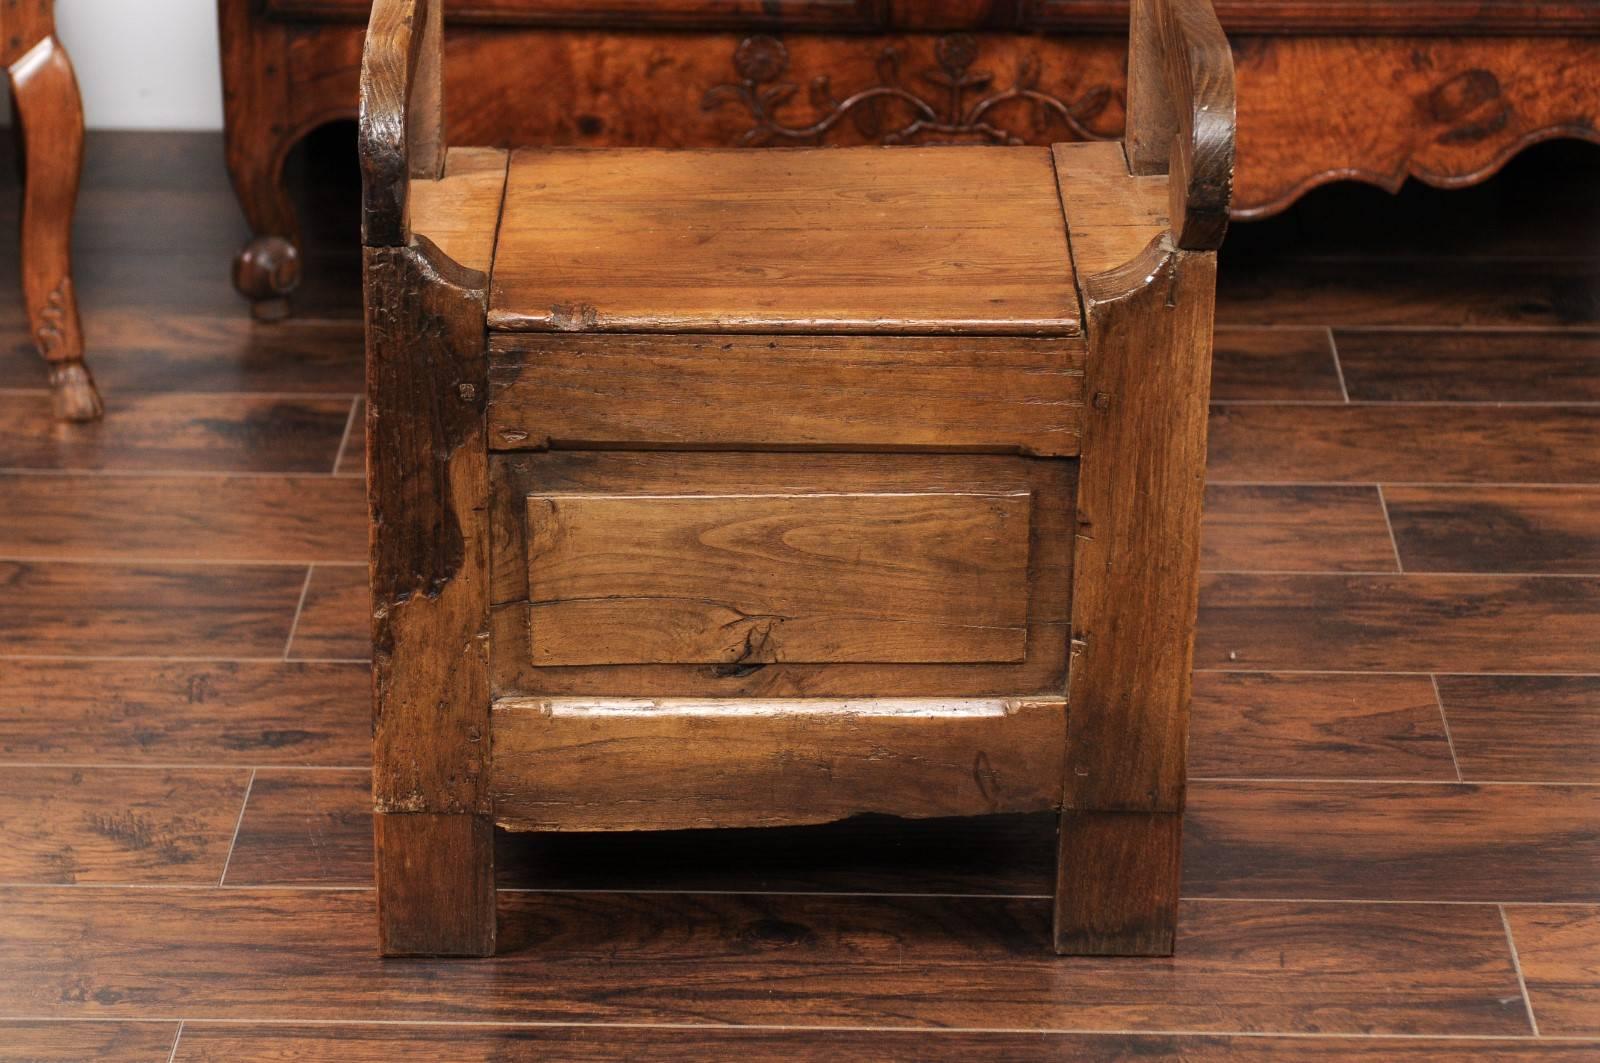 English Country Pine Chair circa 1800 with Scrolled Arms and Lift-Top Seat For Sale 3